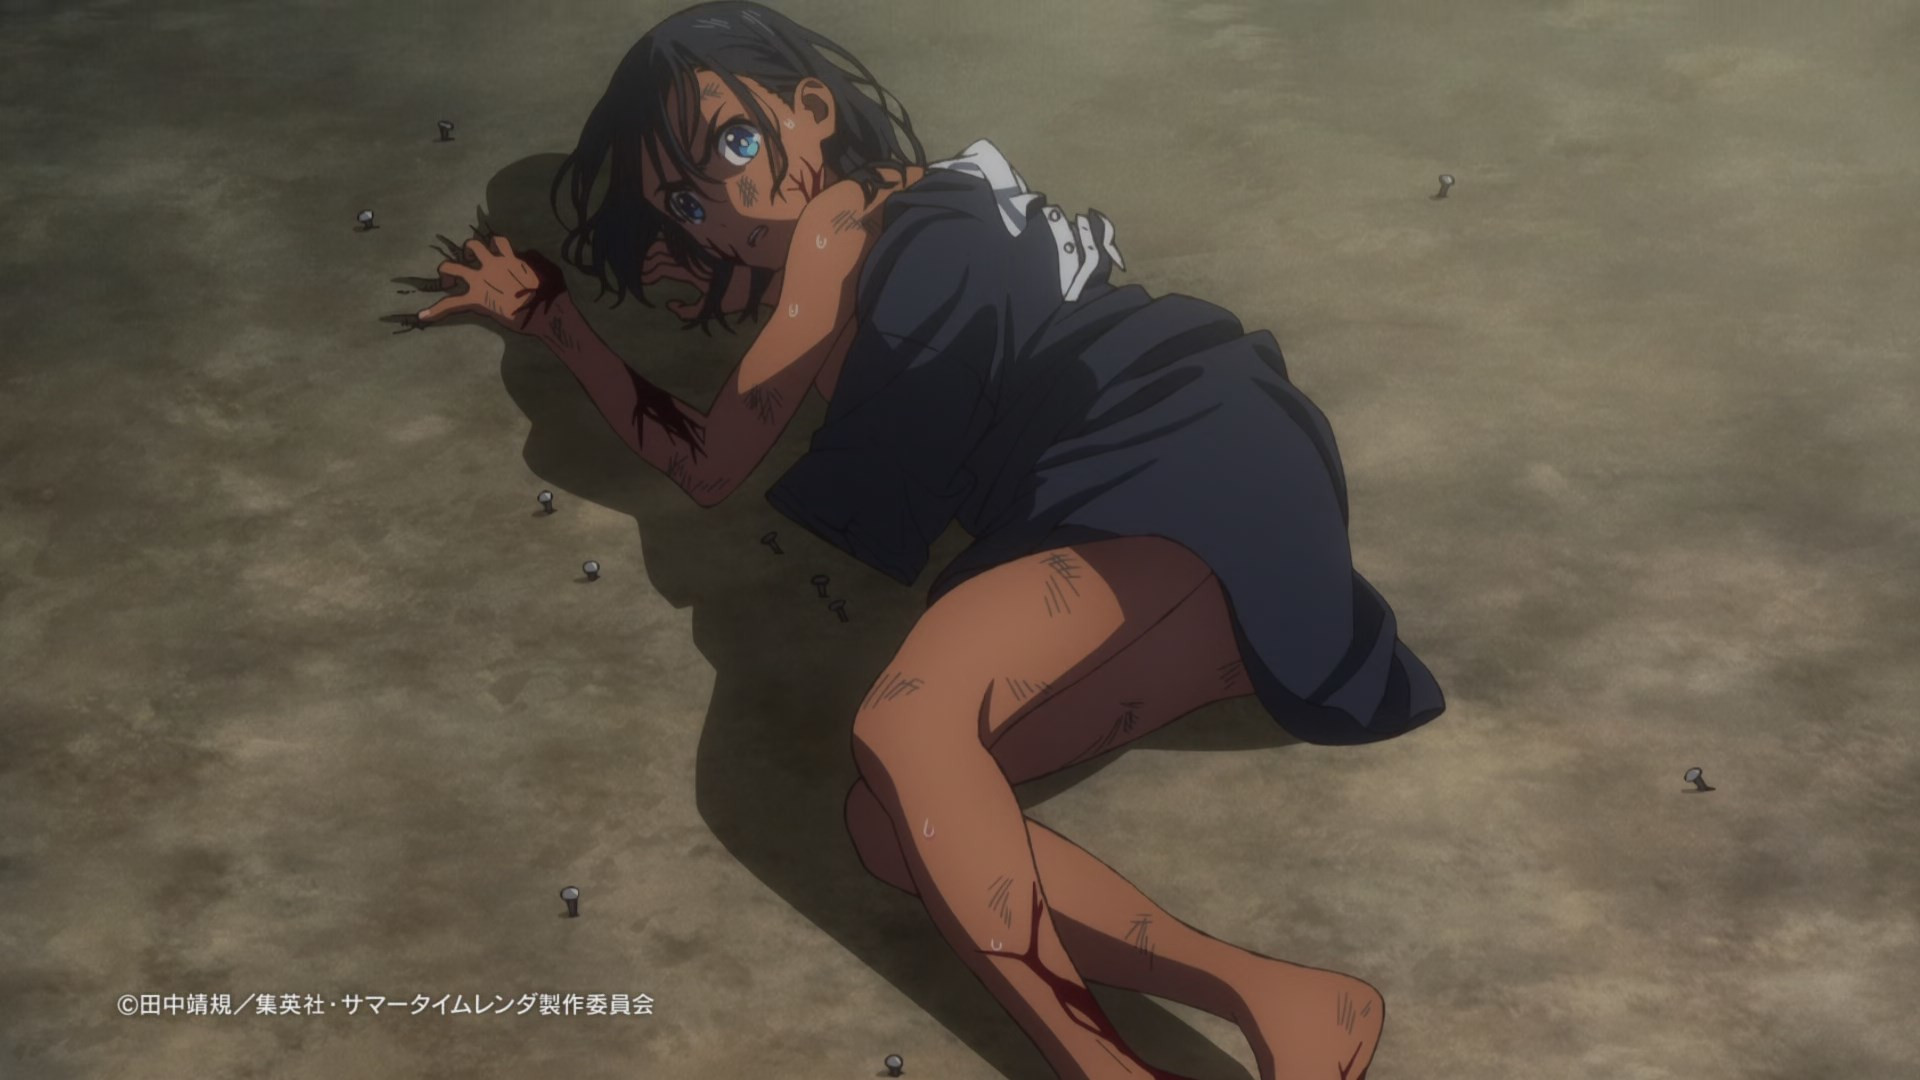 Summer Time Rendering Episode 6: Shinpei Dies To Save Mio! Release Date